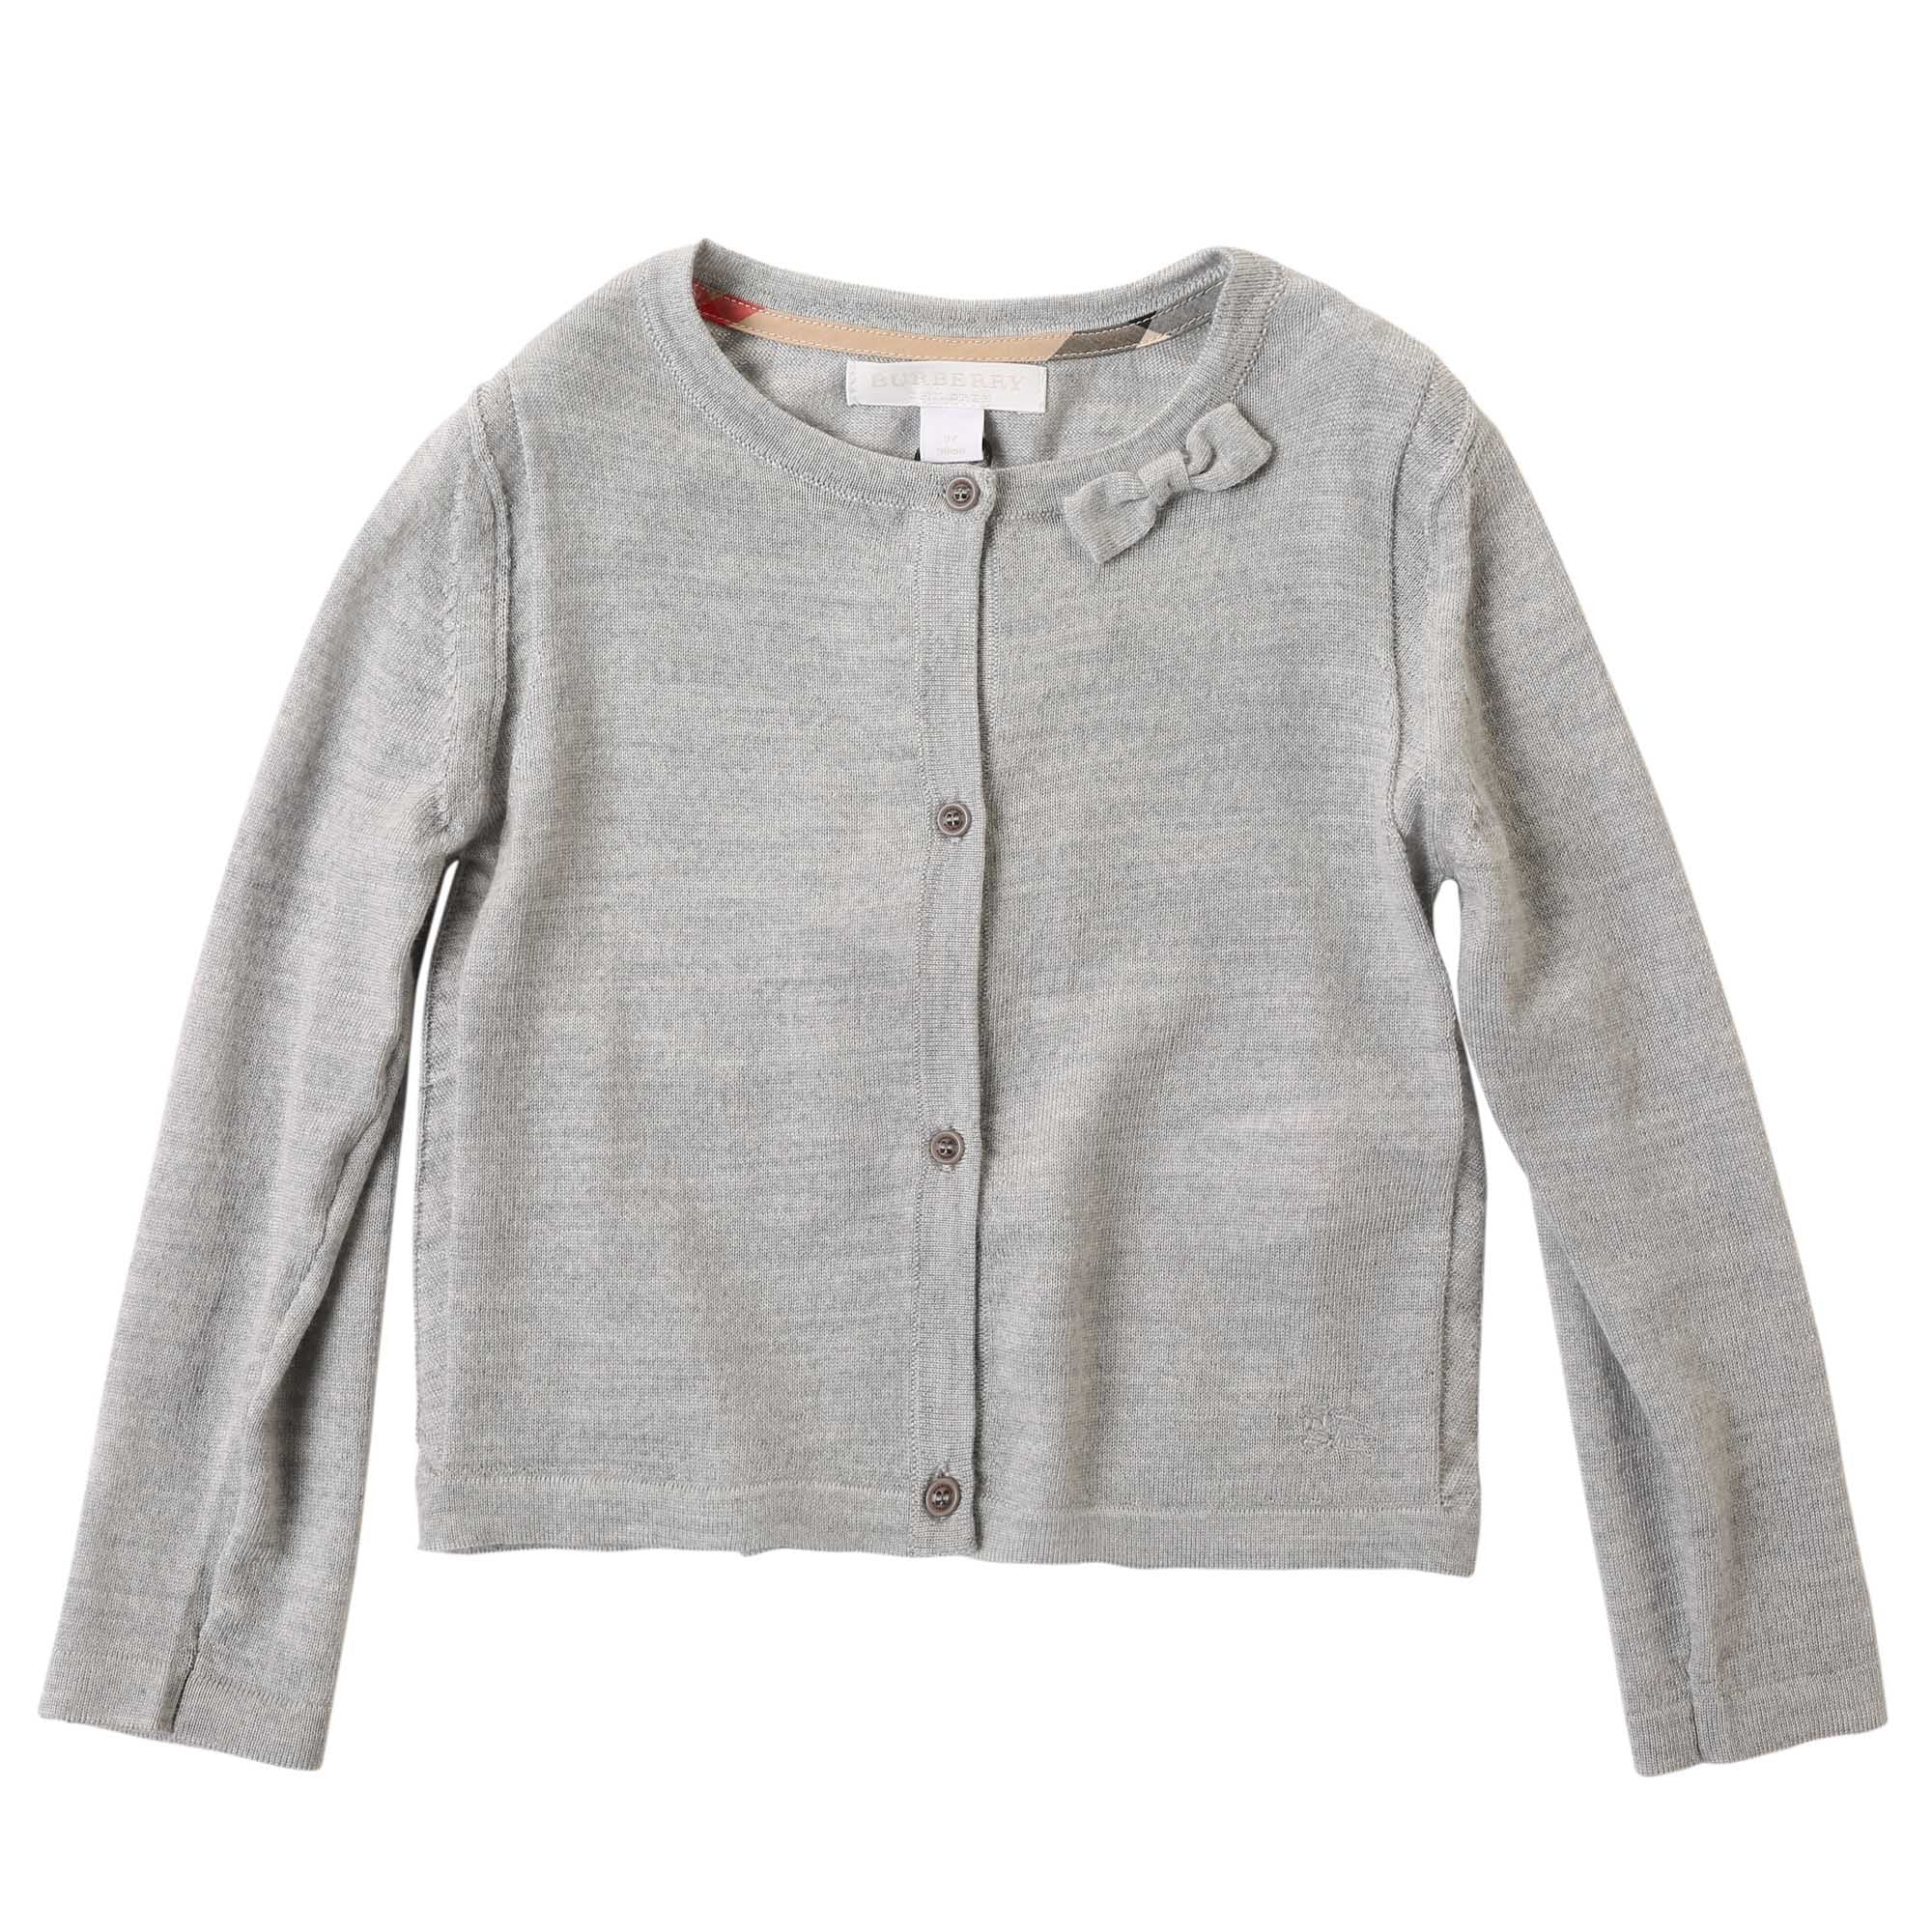 Baby Girls Light Grey Bow Trims Knitted Cardigan - CÉMAROSE | Children's Fashion Store - 1